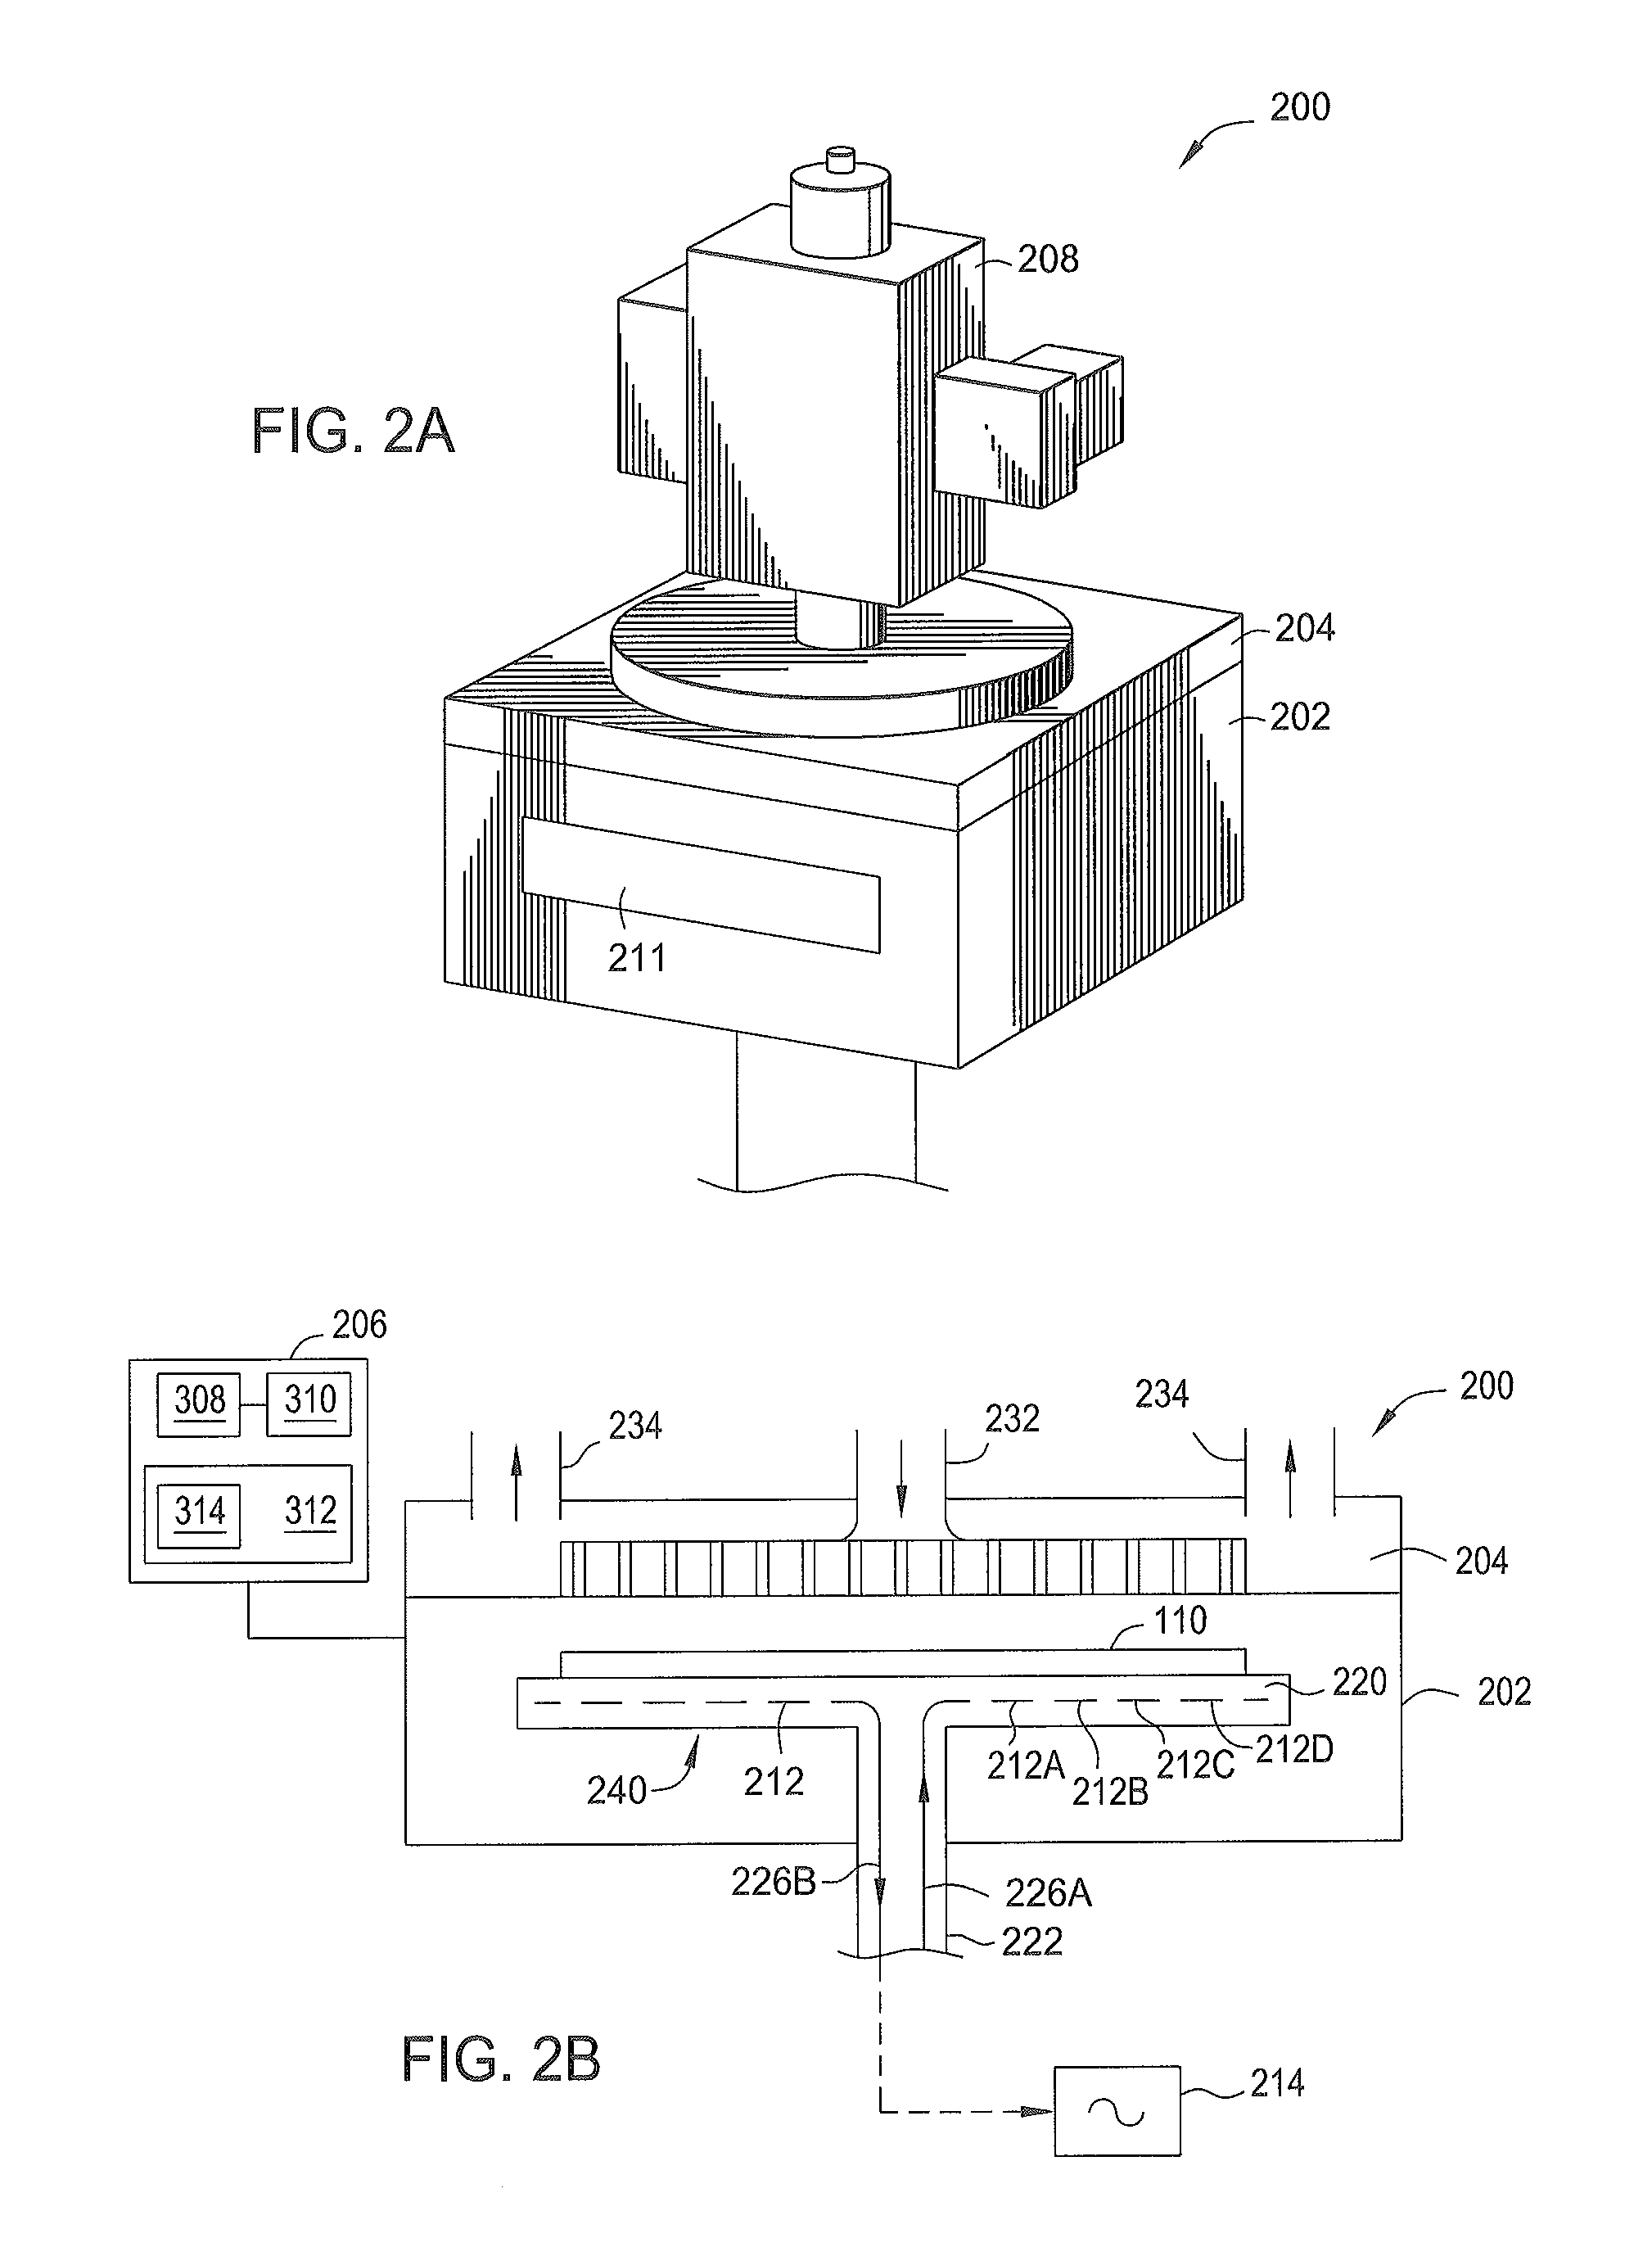 Method and apparatus for substrate support with multi-zone heating